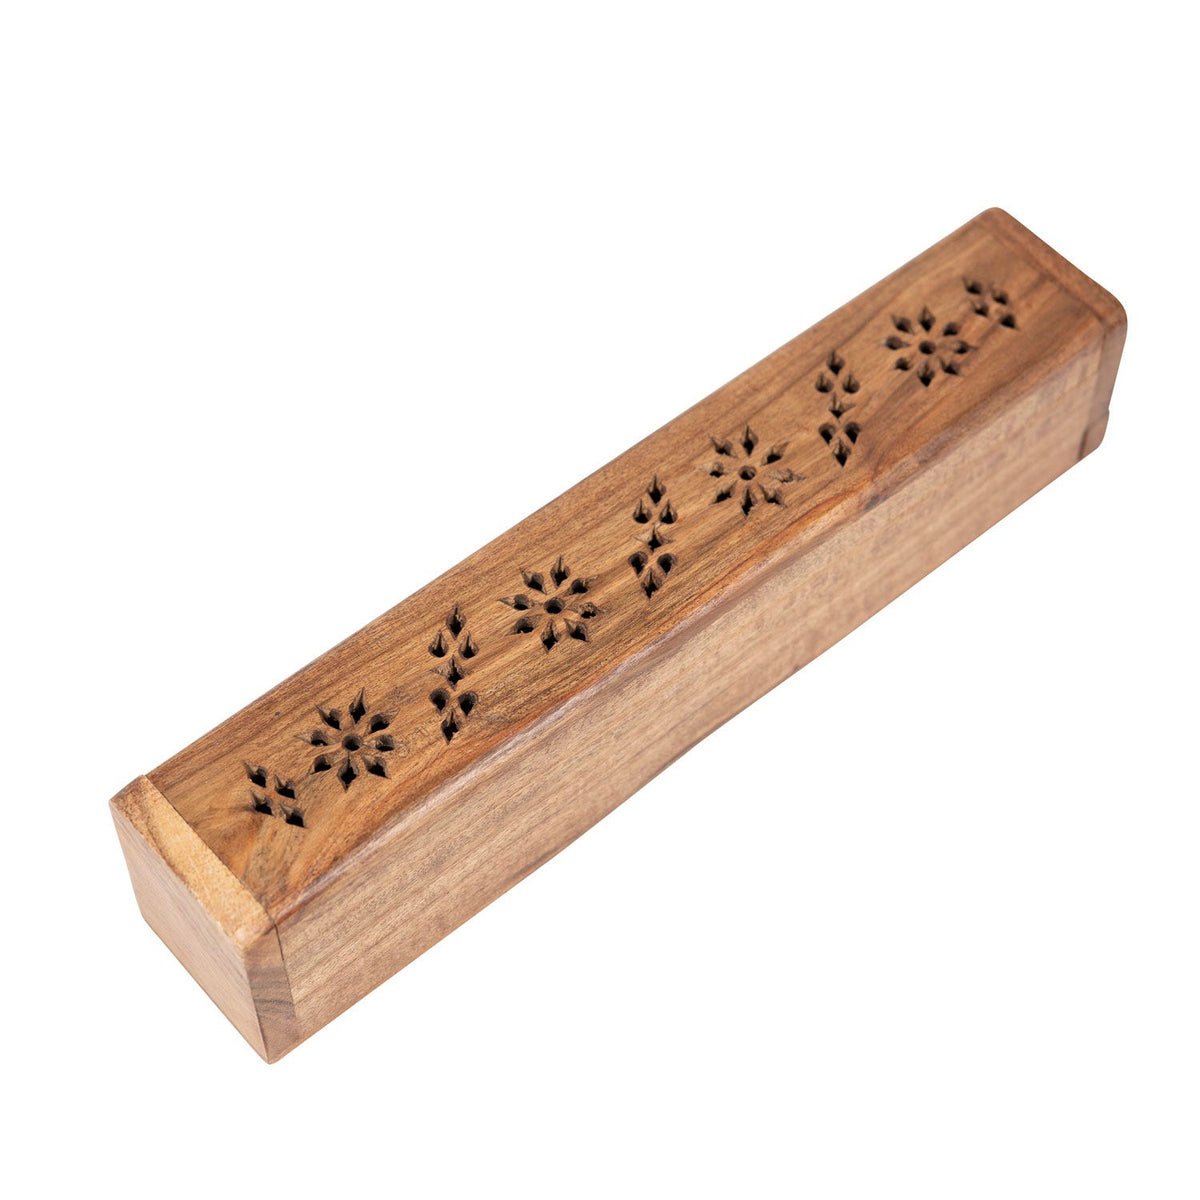 Wooden Incense Box / Storage Box, Plain – All My Relations